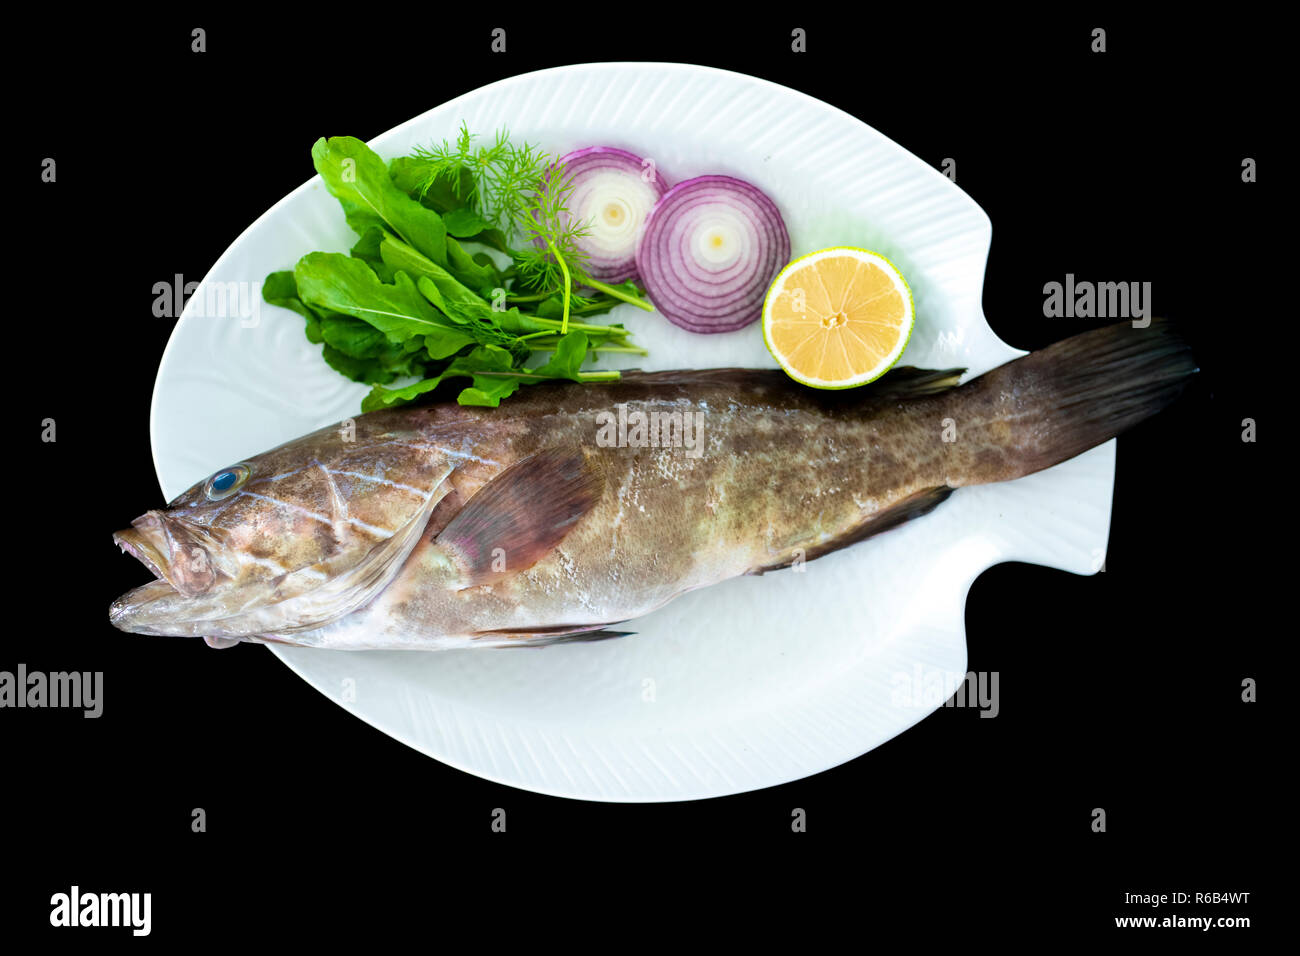 Mediterranean golden grouper fish with rockets leaves served on white plate with black background Stock Photo